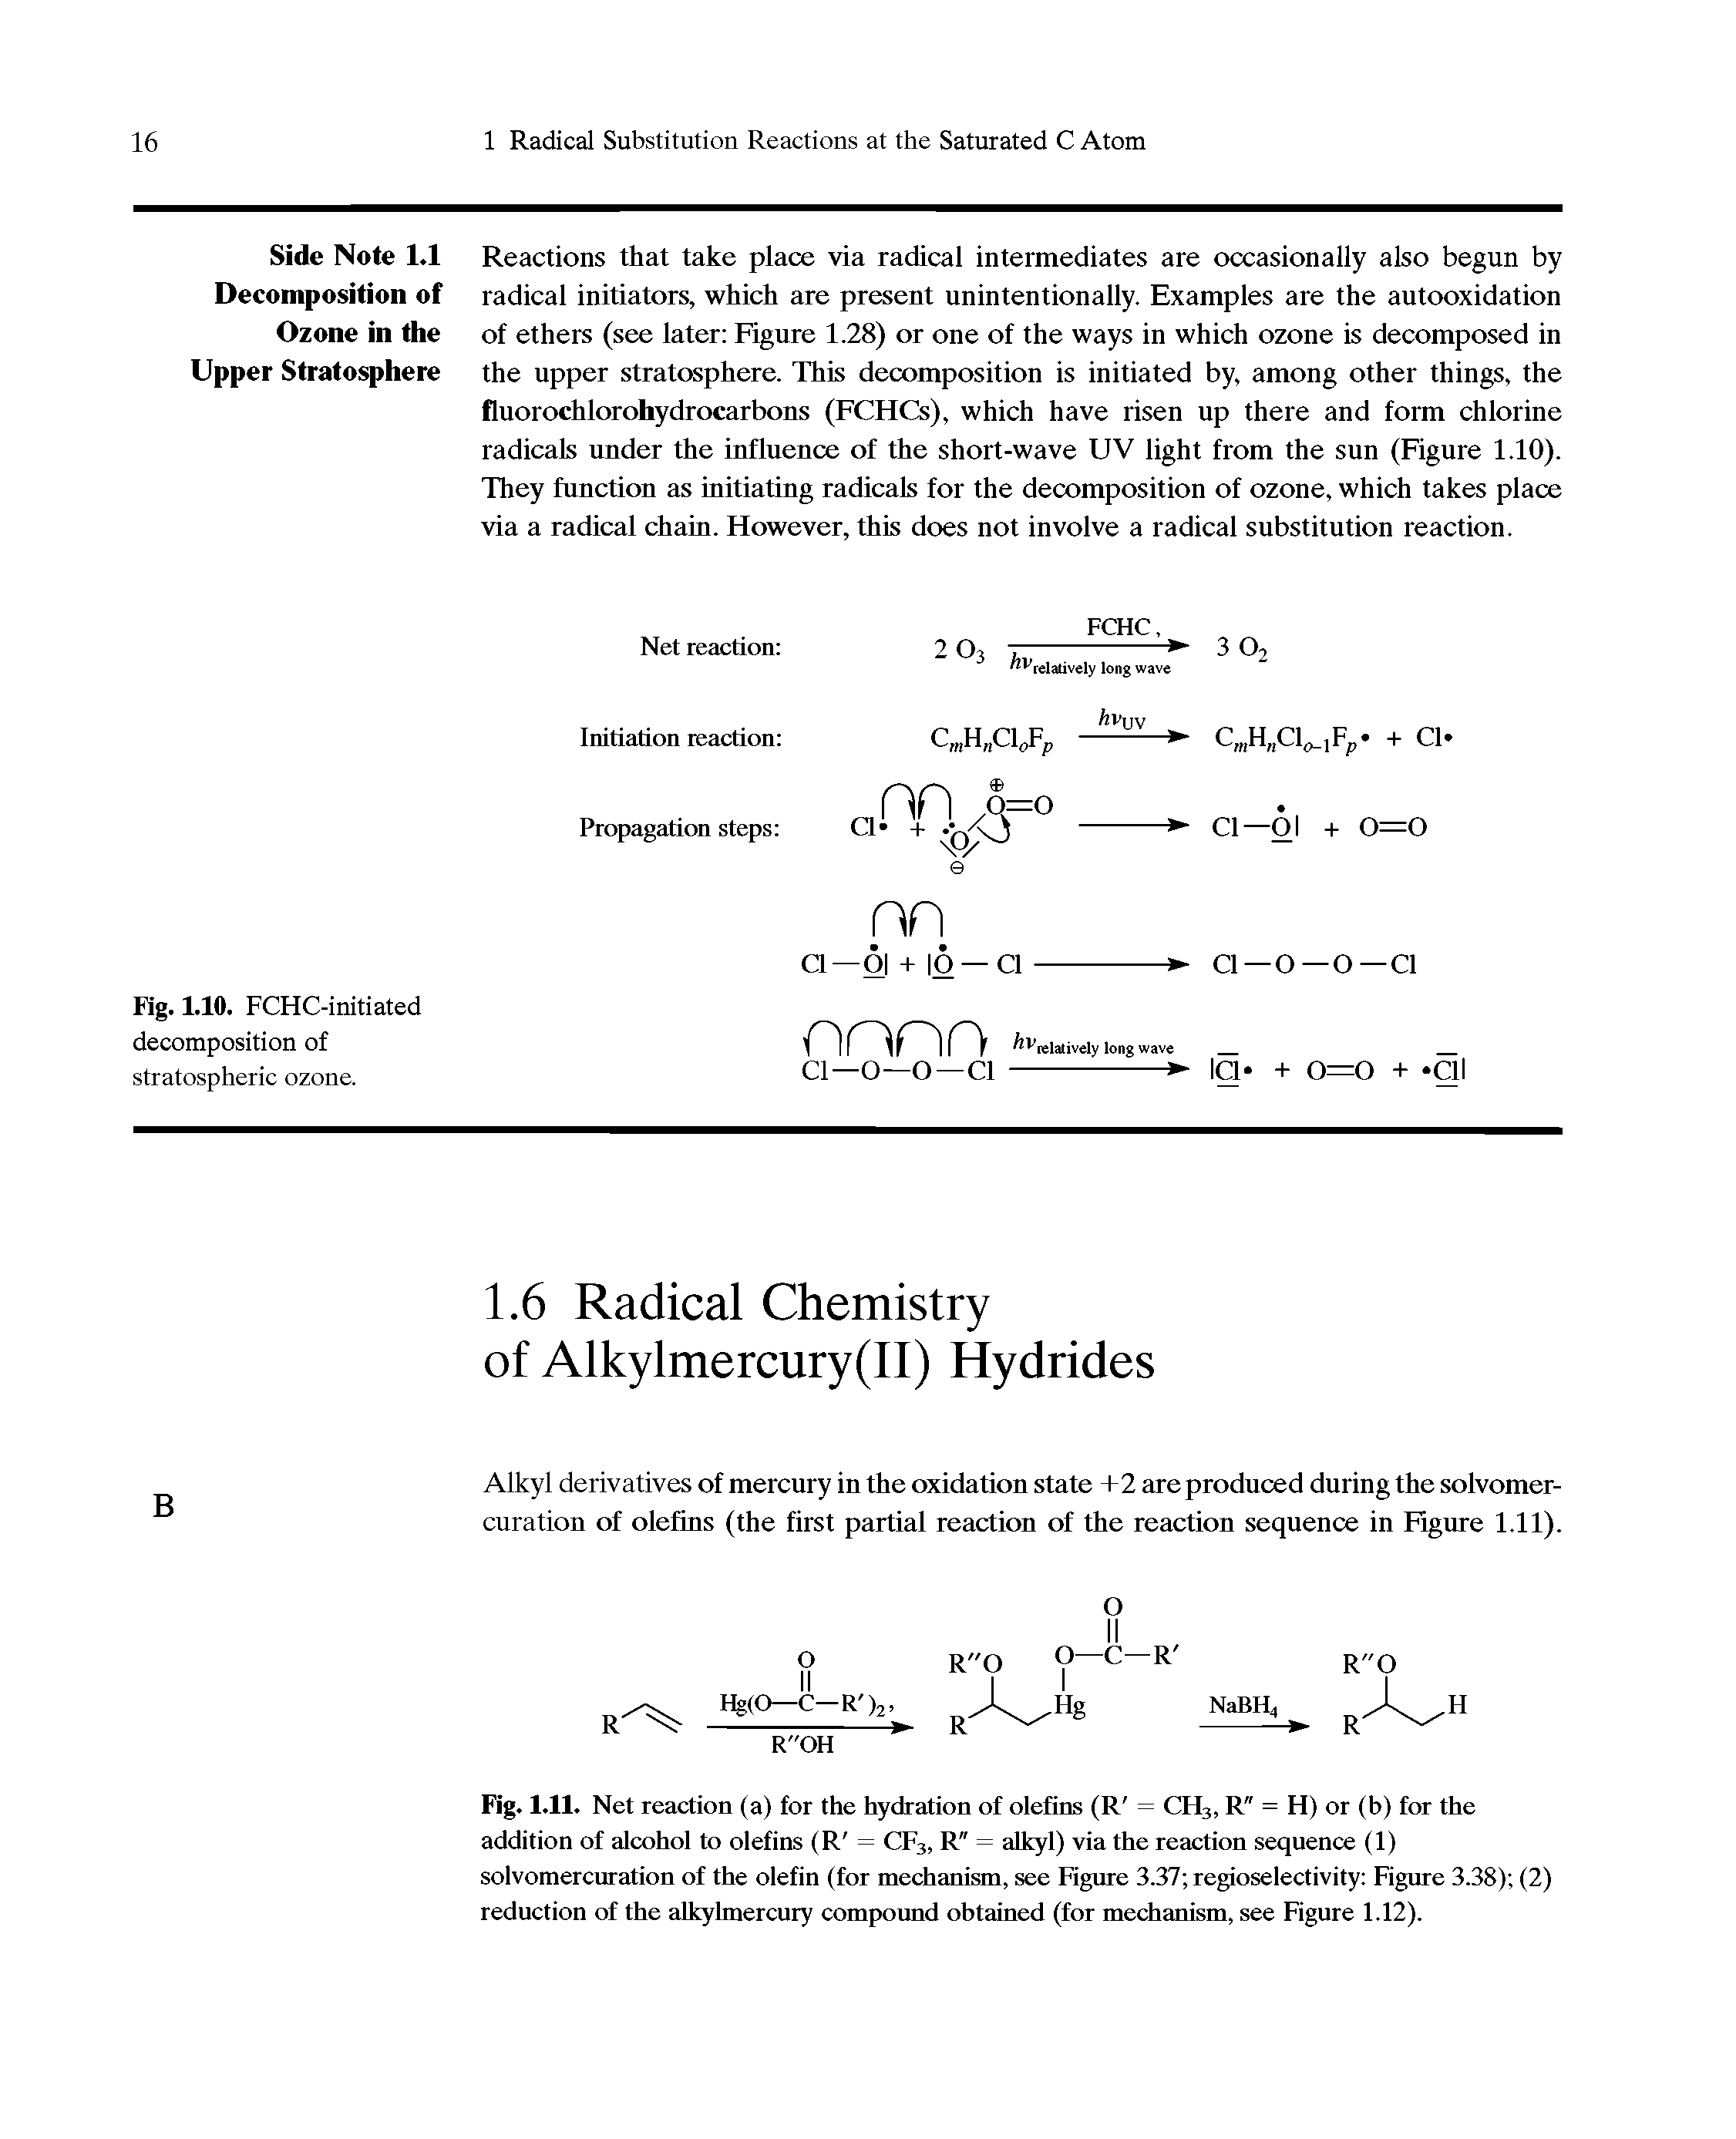 Fig. 1.11. Net reaction (a) for the hydration of olefins (R = CH3, R = H) or (b) for the addition of alcohol to olefins (R = CF3, R = alkyl) via the reaction sequence (1) solvomercuration of the olefin (for mechanism, see Figure 3.37 regioselectivity Figure 3.38) (2) reduction of the alkylmercury compound obtained (for mechanism, see Figure 1.12).